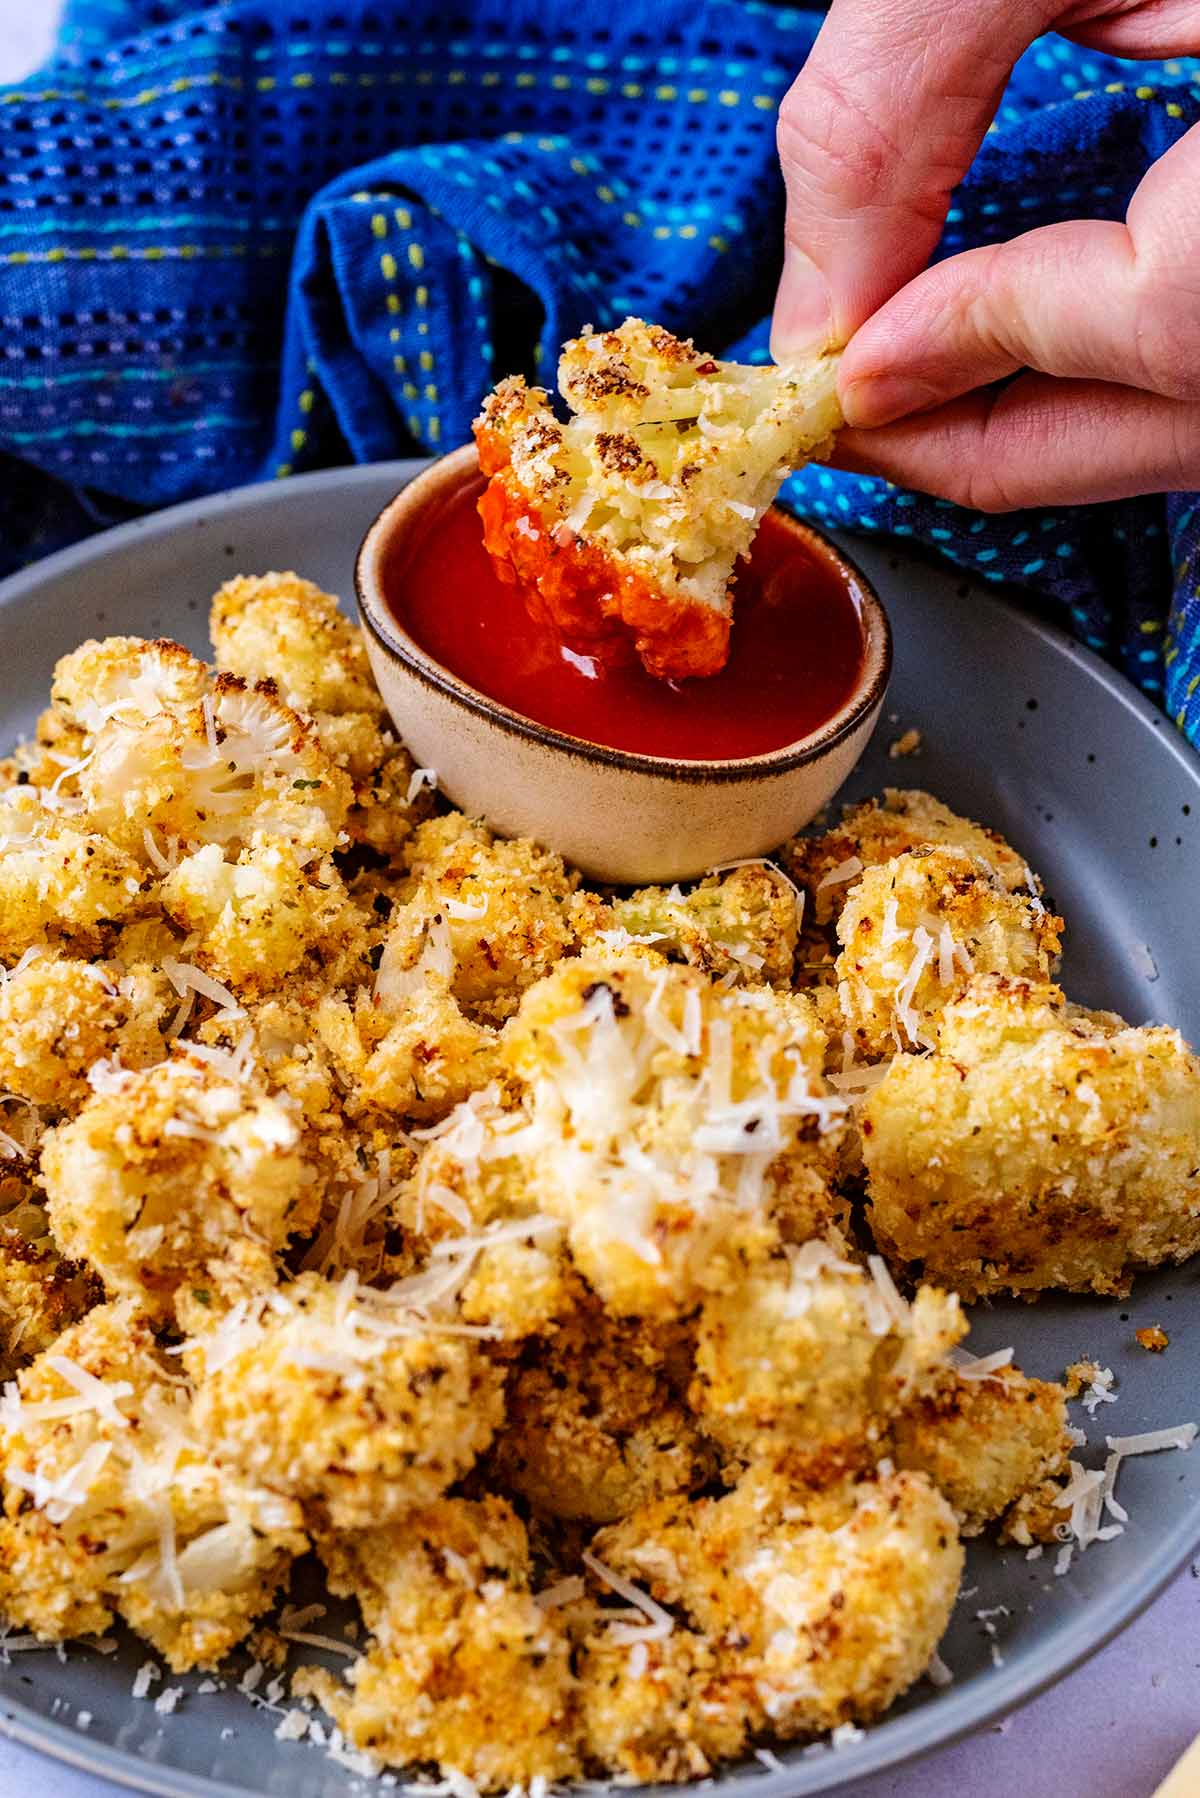 A hand dipping a crispy cauliflower floret into a small bowl of sauce.